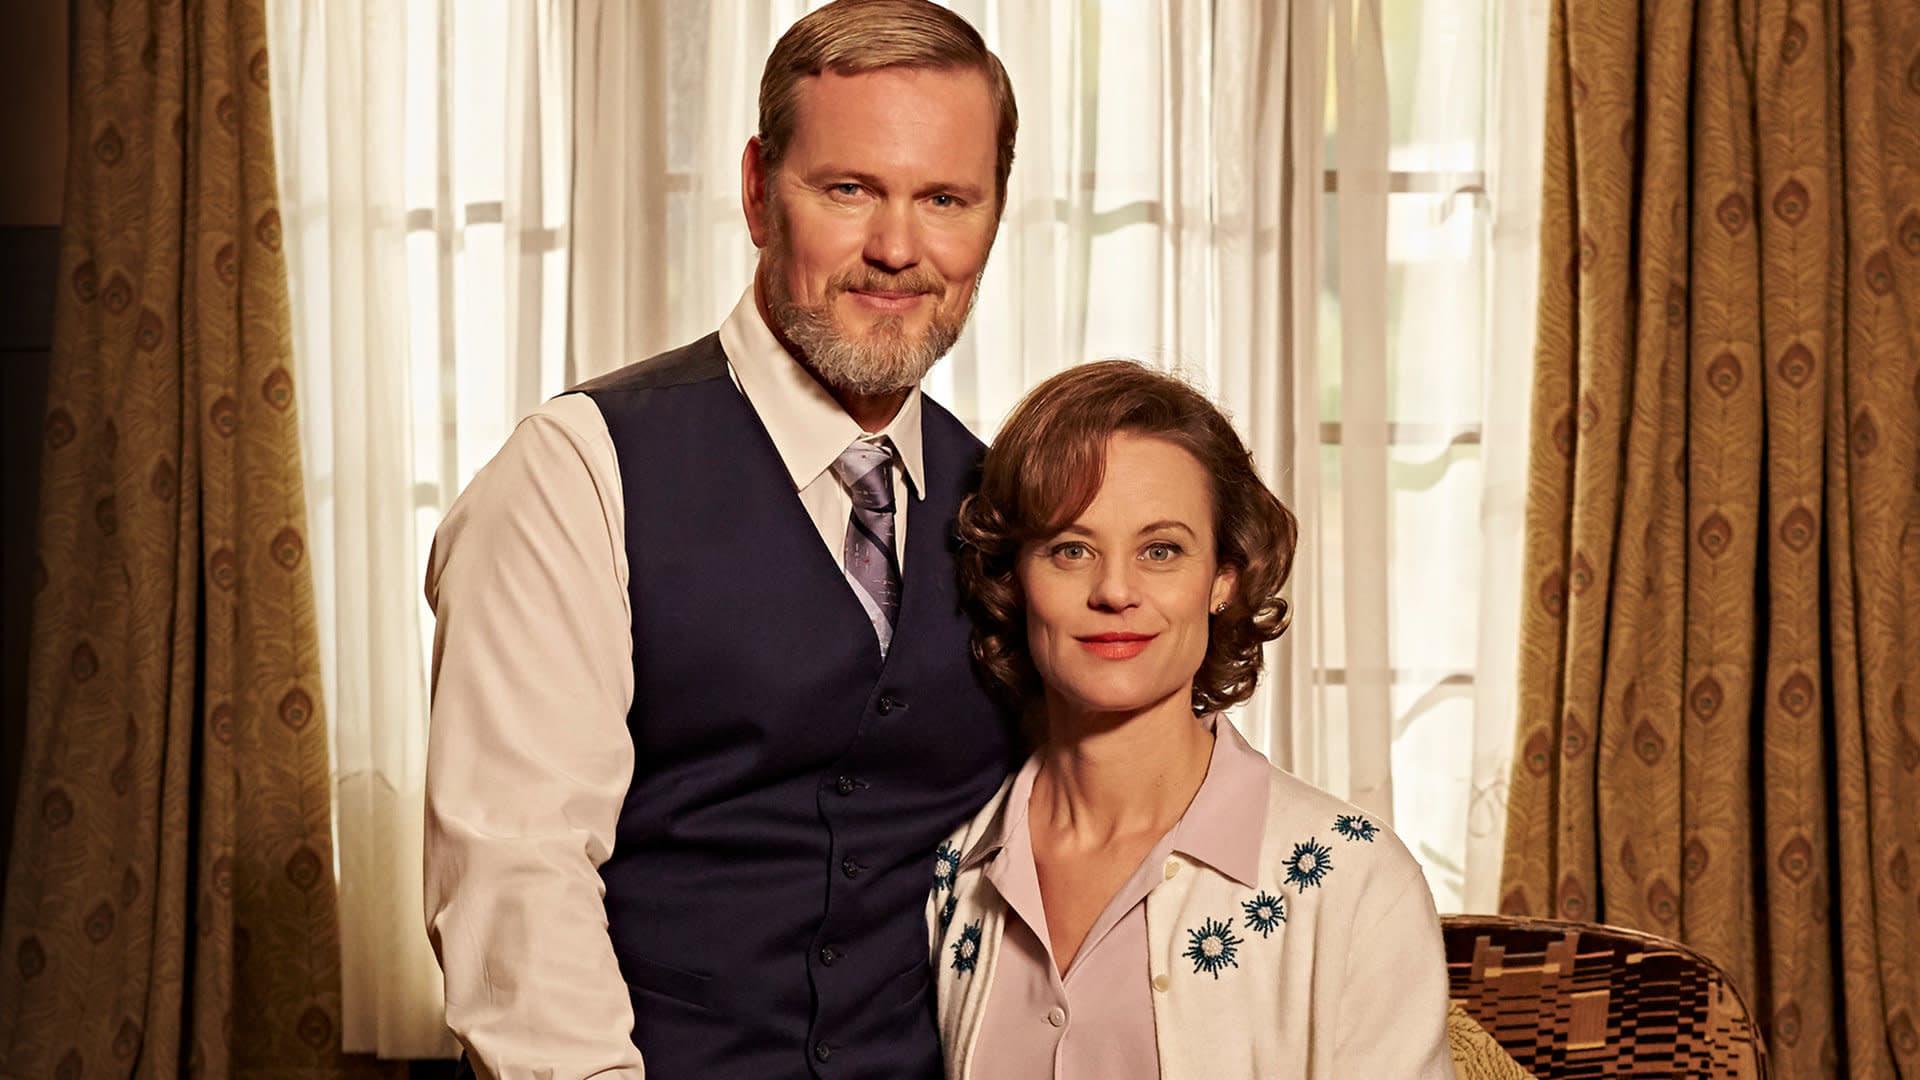 The Doctor Blake Mysteries: Family Portrait backdrop